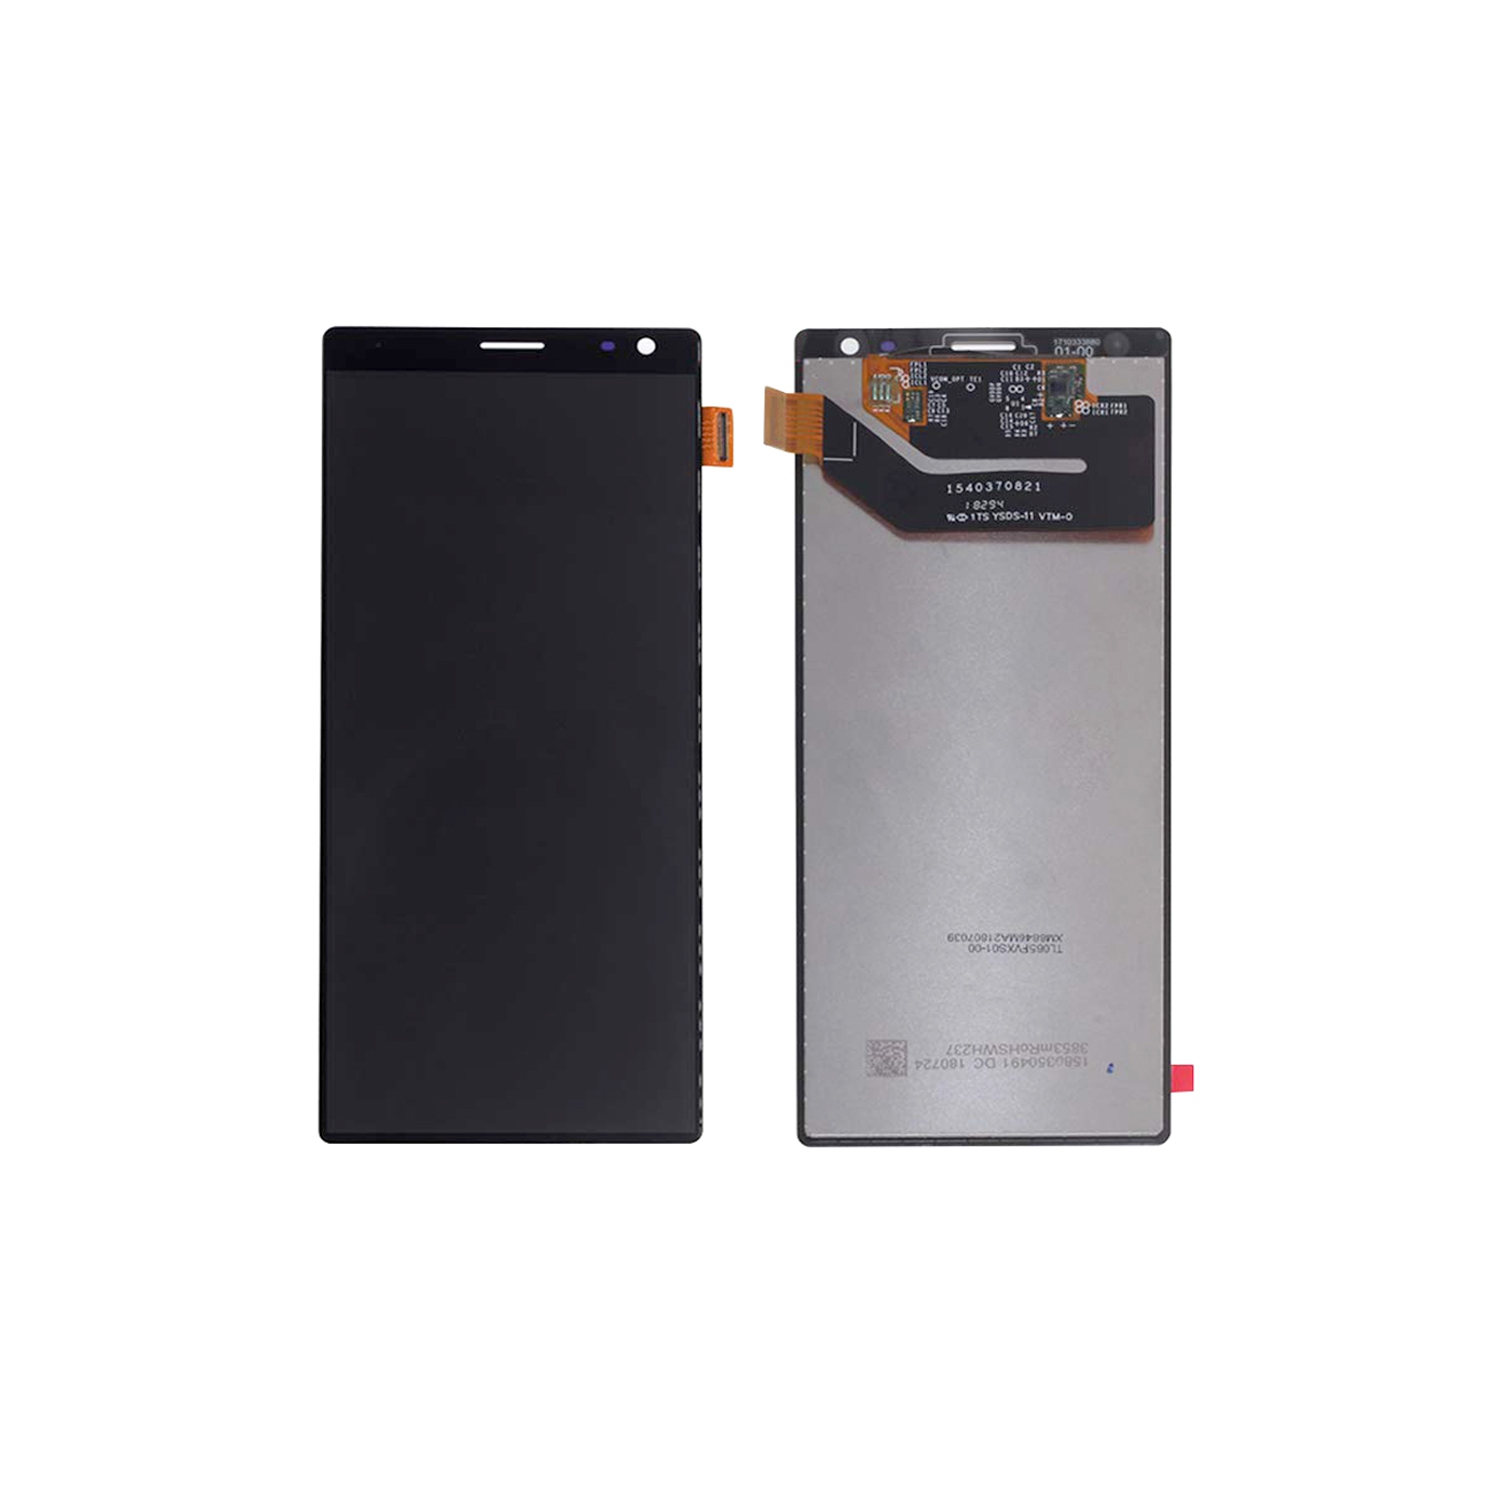 Replacement LCD Display Touch Screen Digitizer Assembly Compatible With Sony Xperia 10 Plus i3223 - Black